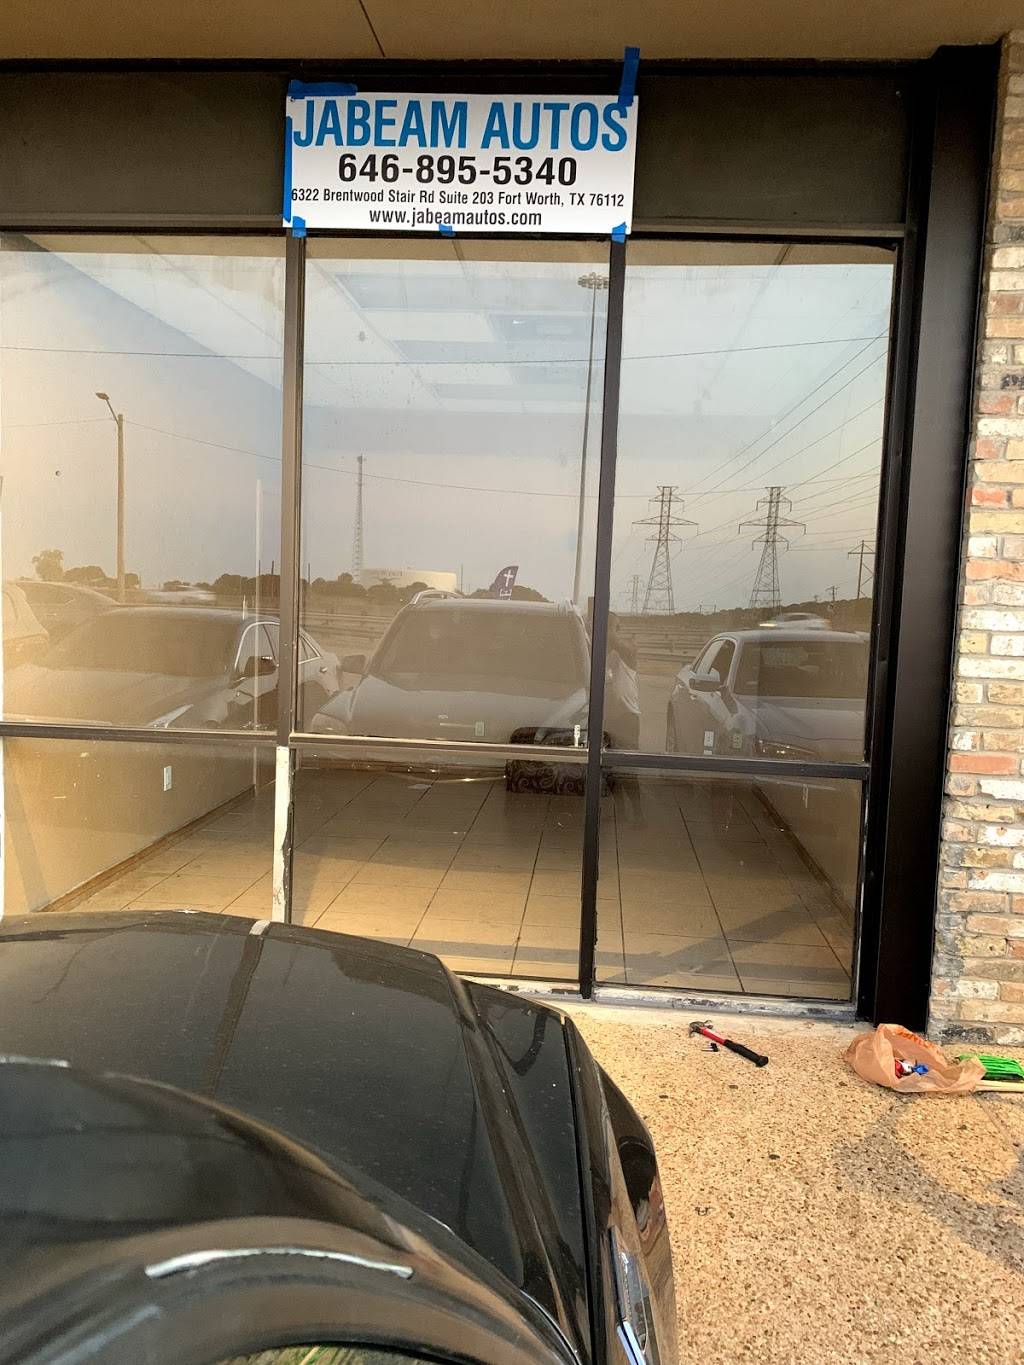 Jabeam Autos | 6320 Brentwood Stair Rd #203, Fort Worth, TX 76112, USA | Phone: (646) 895-5340